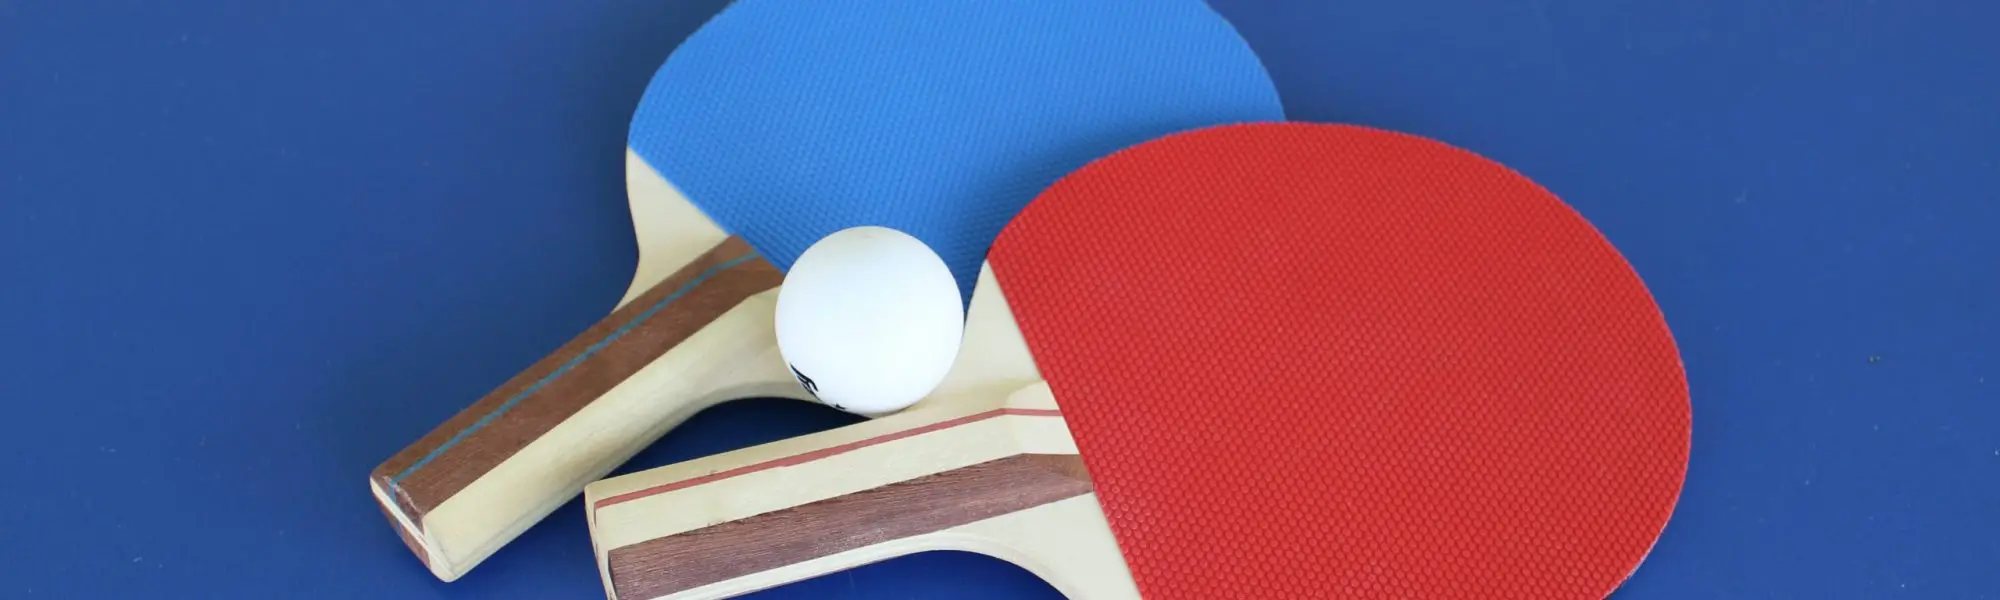 How to make a ping pong paddle out of cardboard